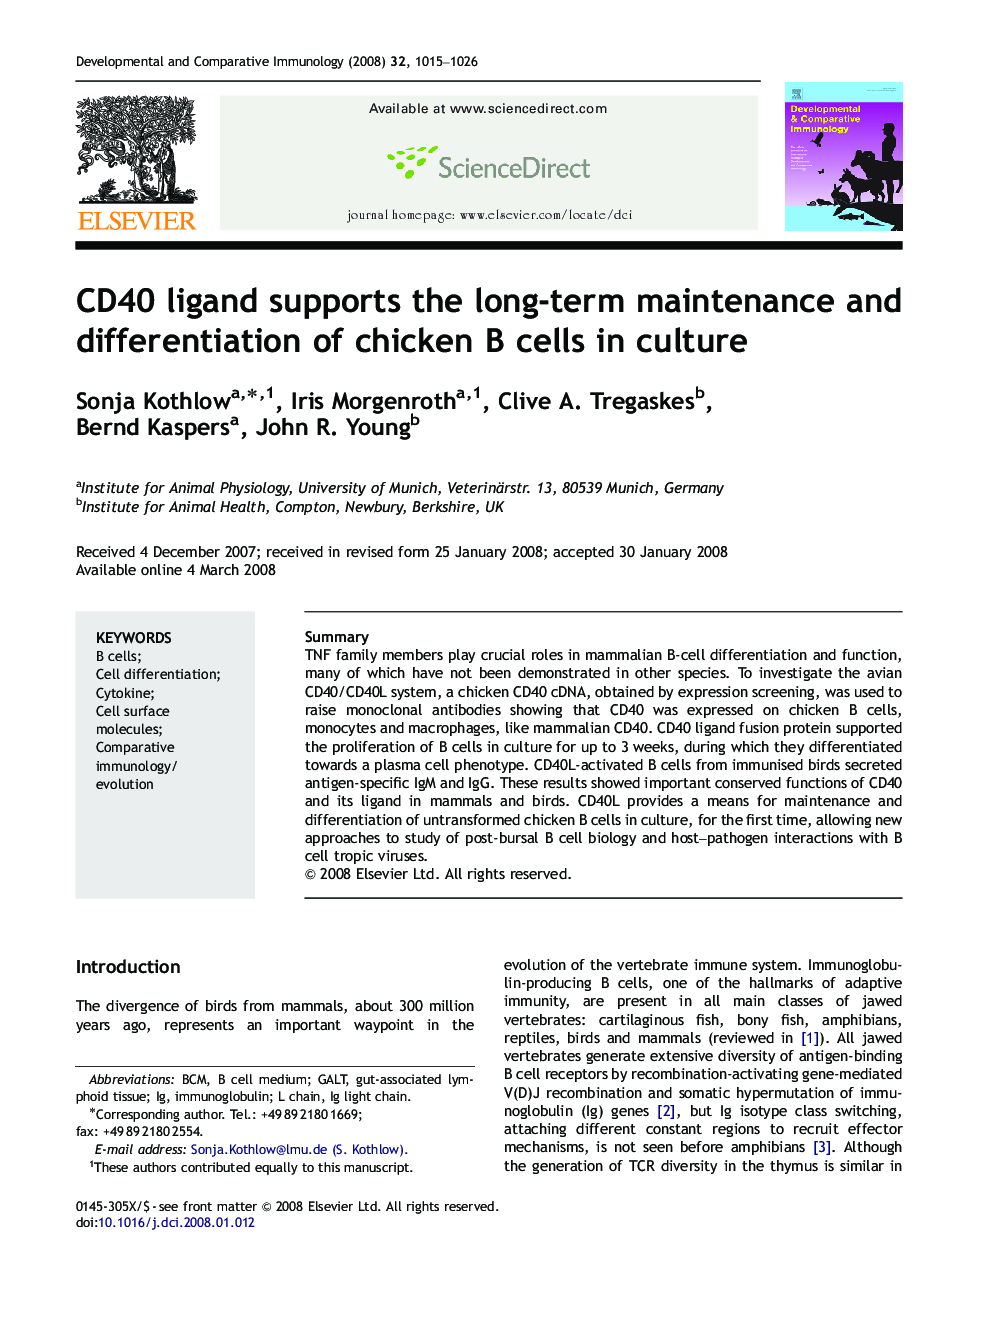 CD40 ligand supports the long-term maintenance and differentiation of chicken B cells in culture